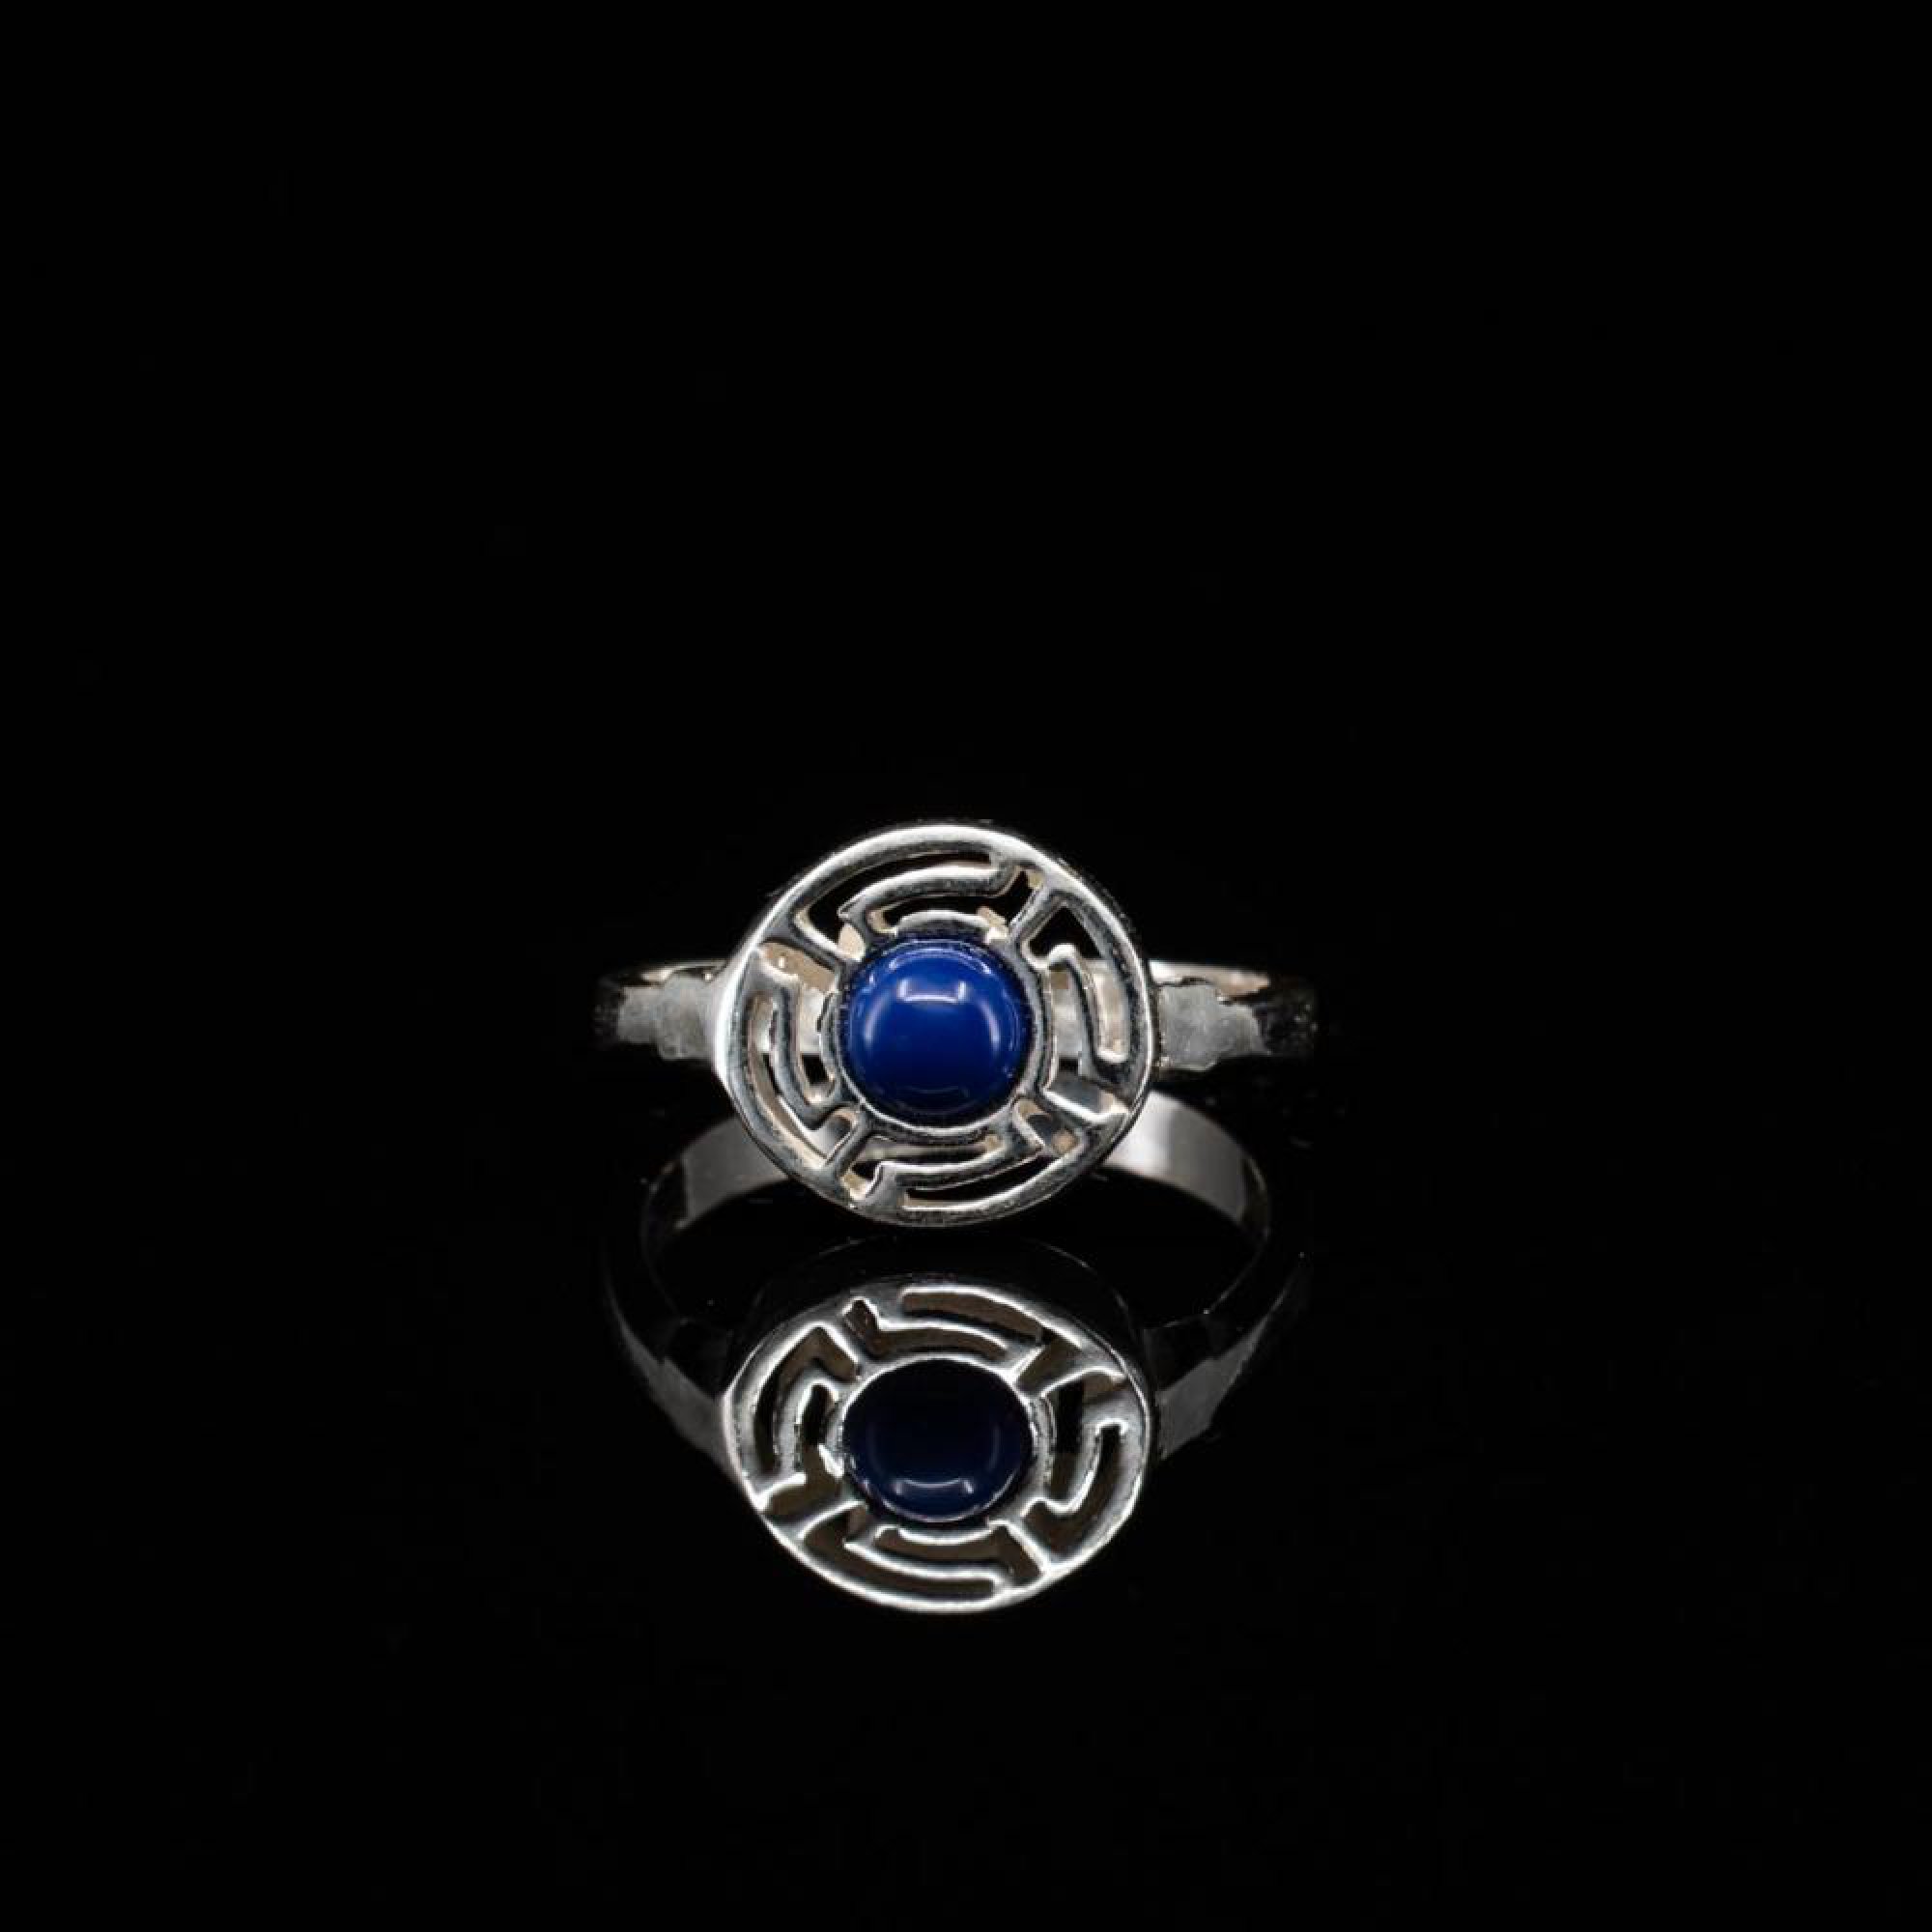 Meander ring with lapis lazuli stone